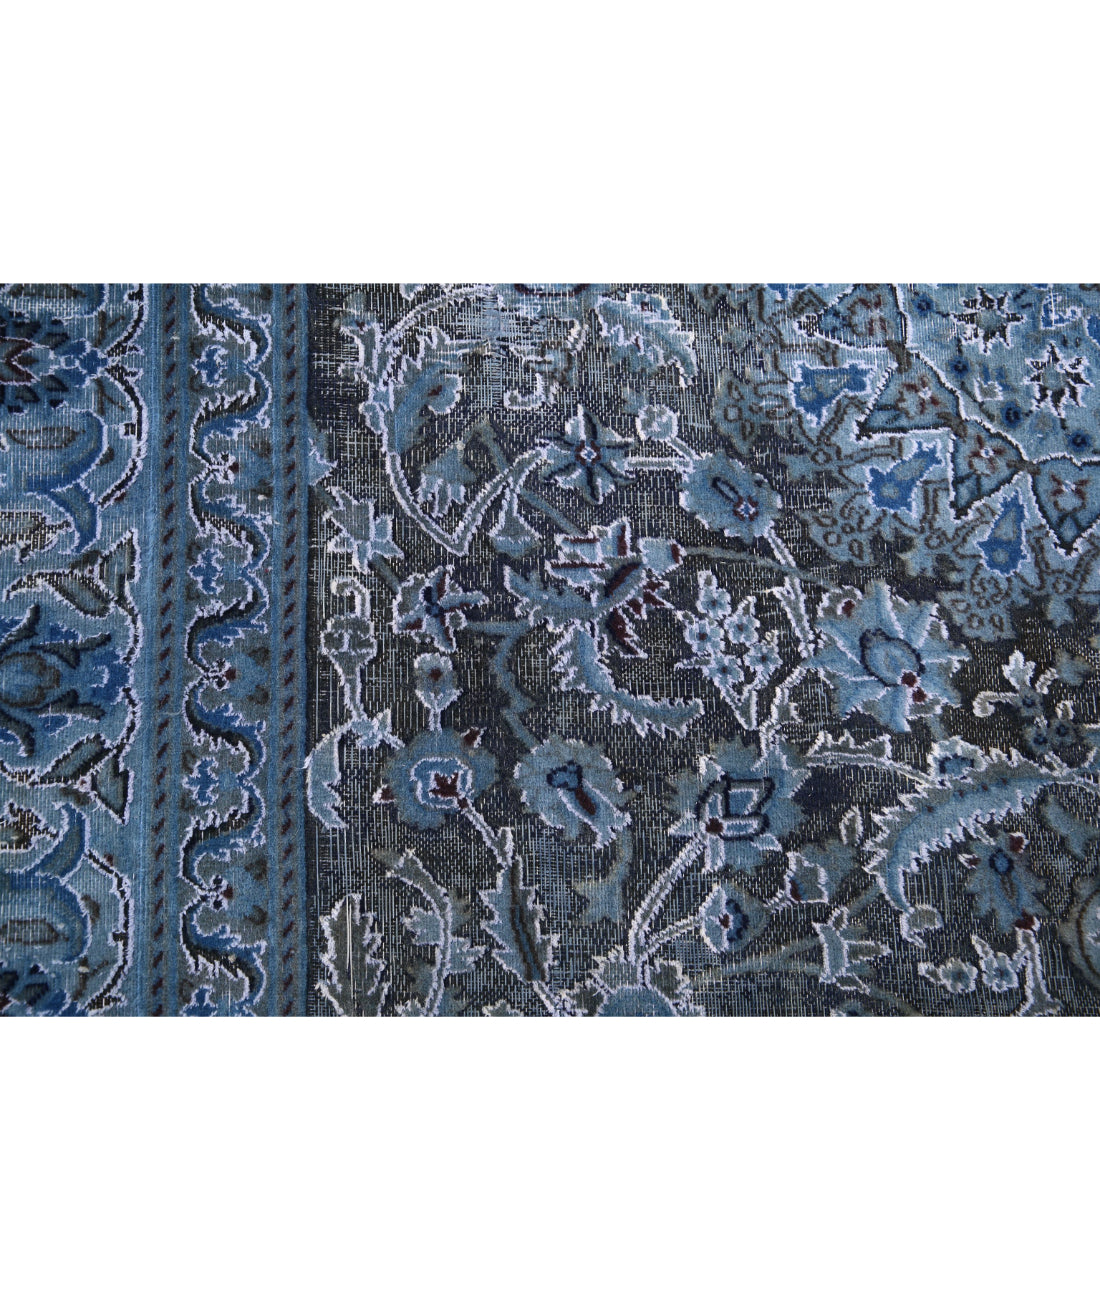 Hand Knotted Vintage Persian Nain Wool Rug - 6'5'' x 9'2'' 6'5'' x 9'2'' (193 X 275) / Blue / Blue